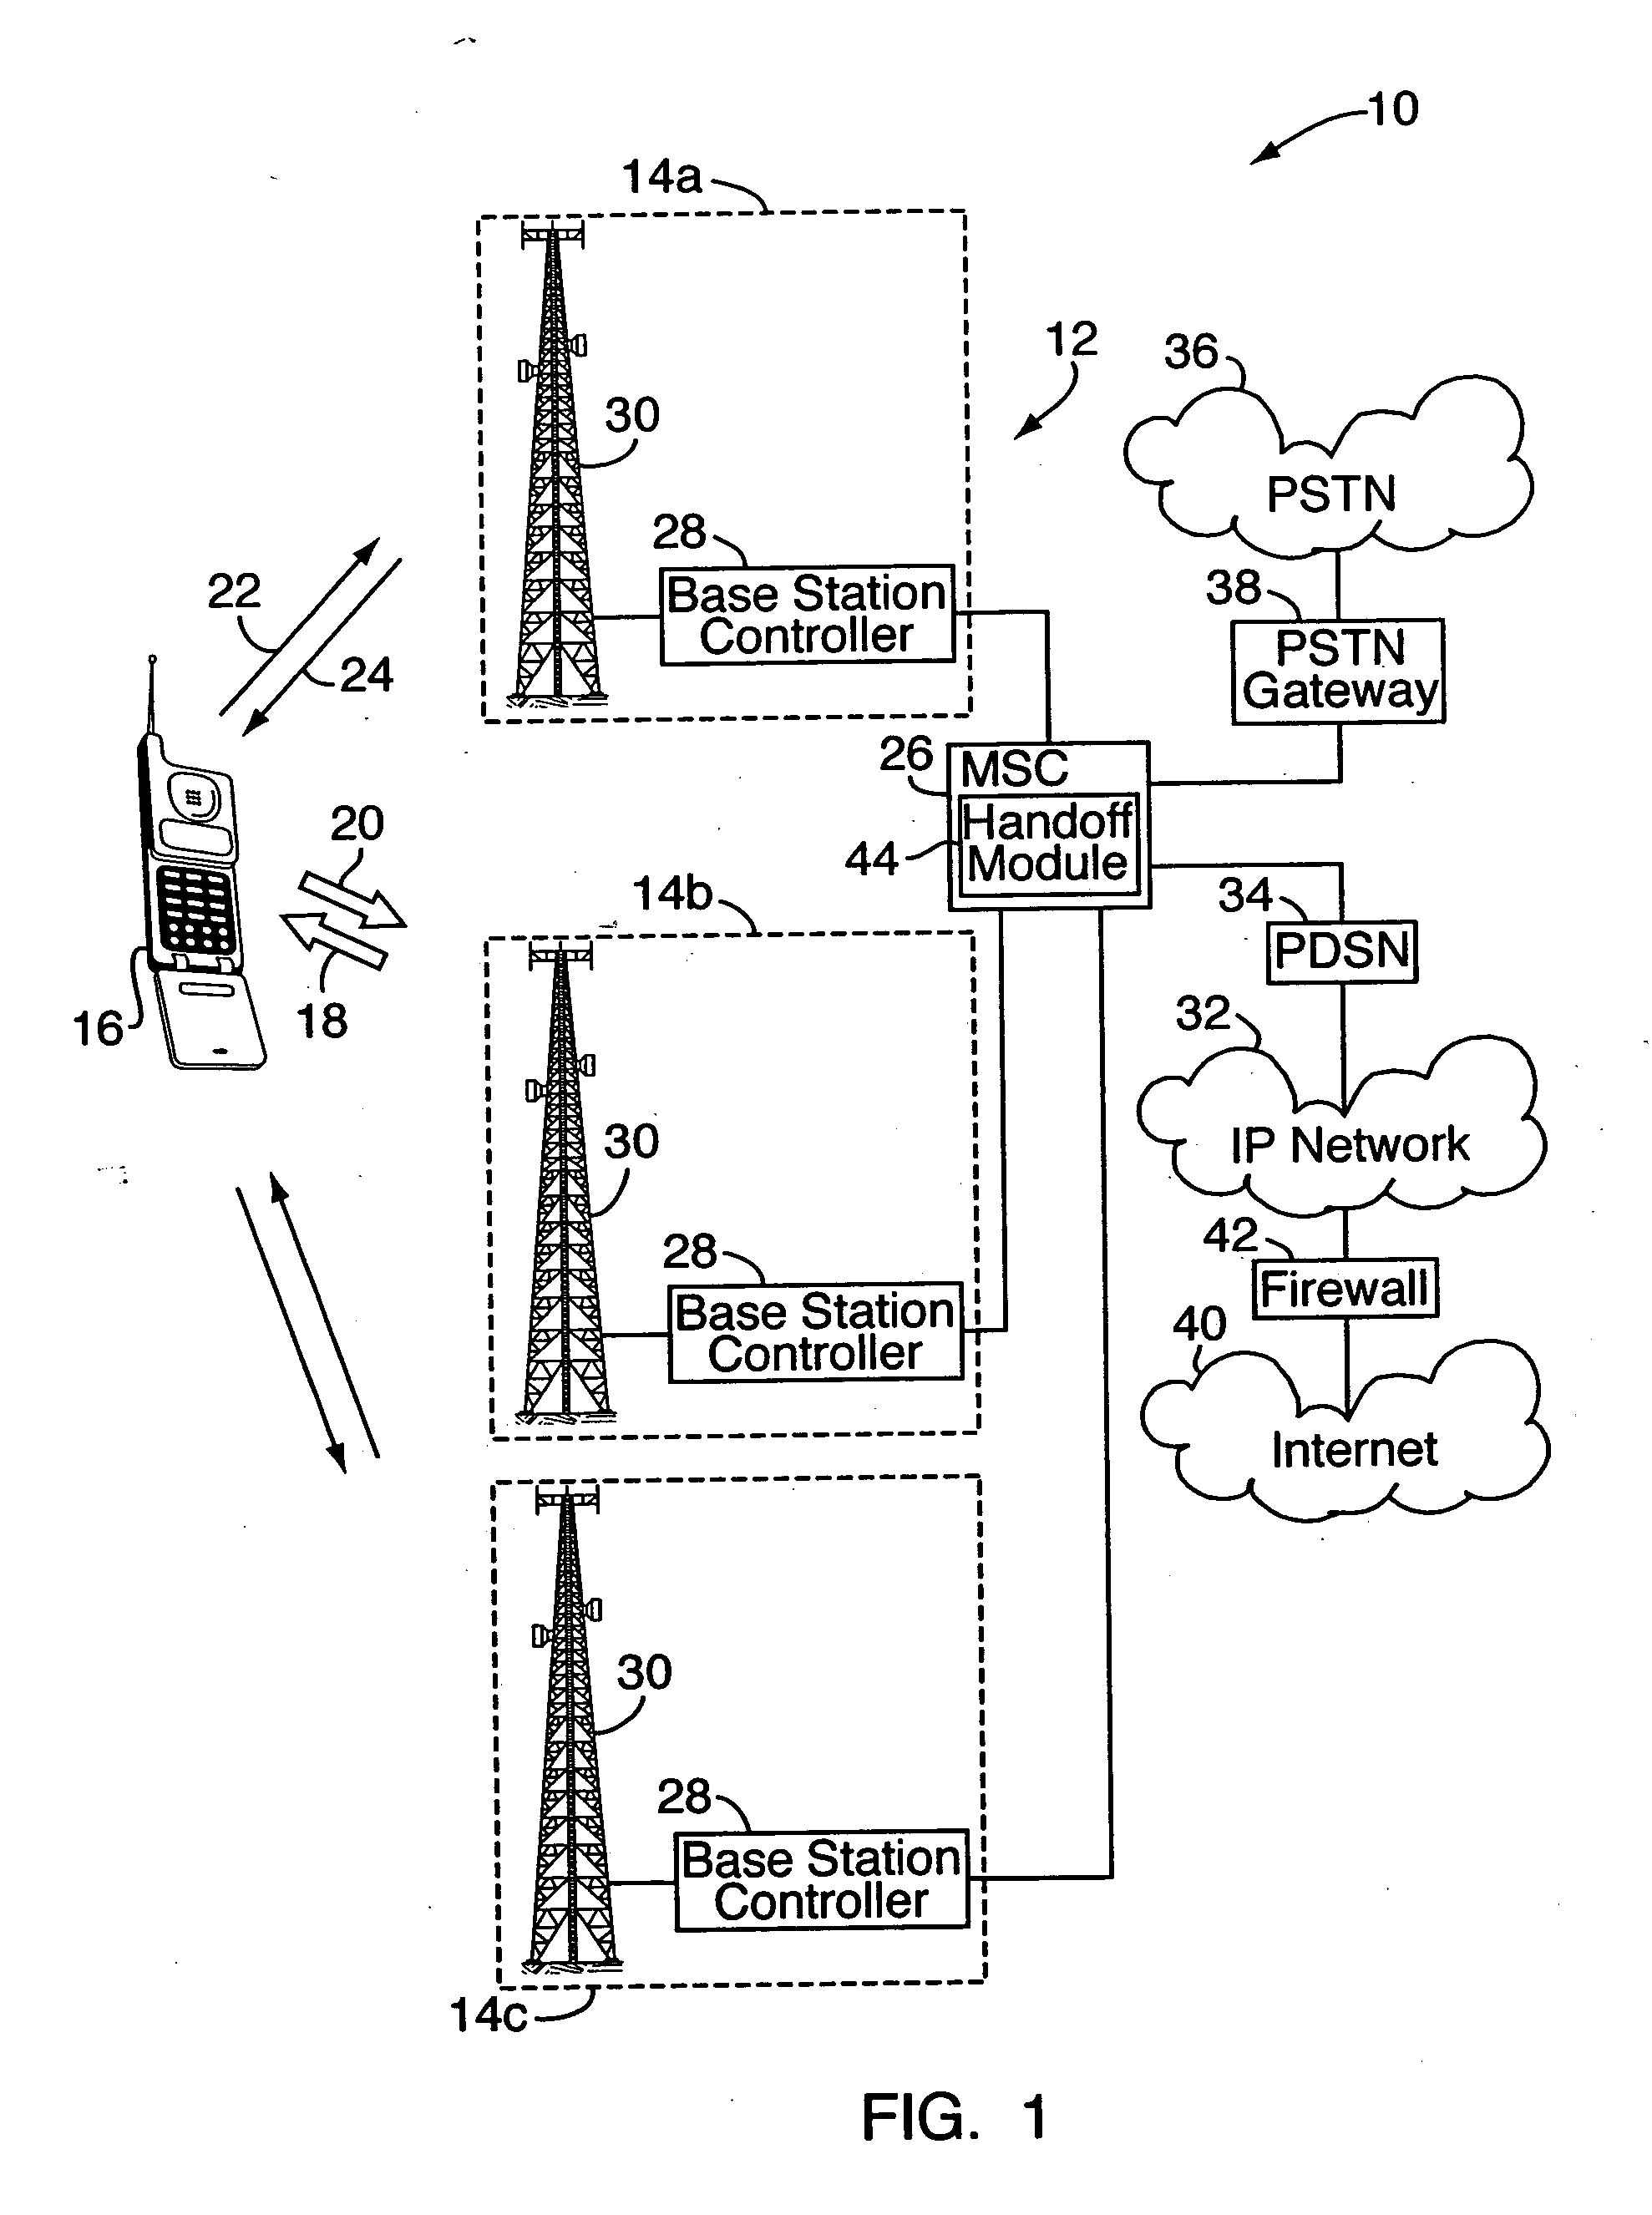 Method for adjusting forward link power control parameters based on forward link quality feedback in wireless network